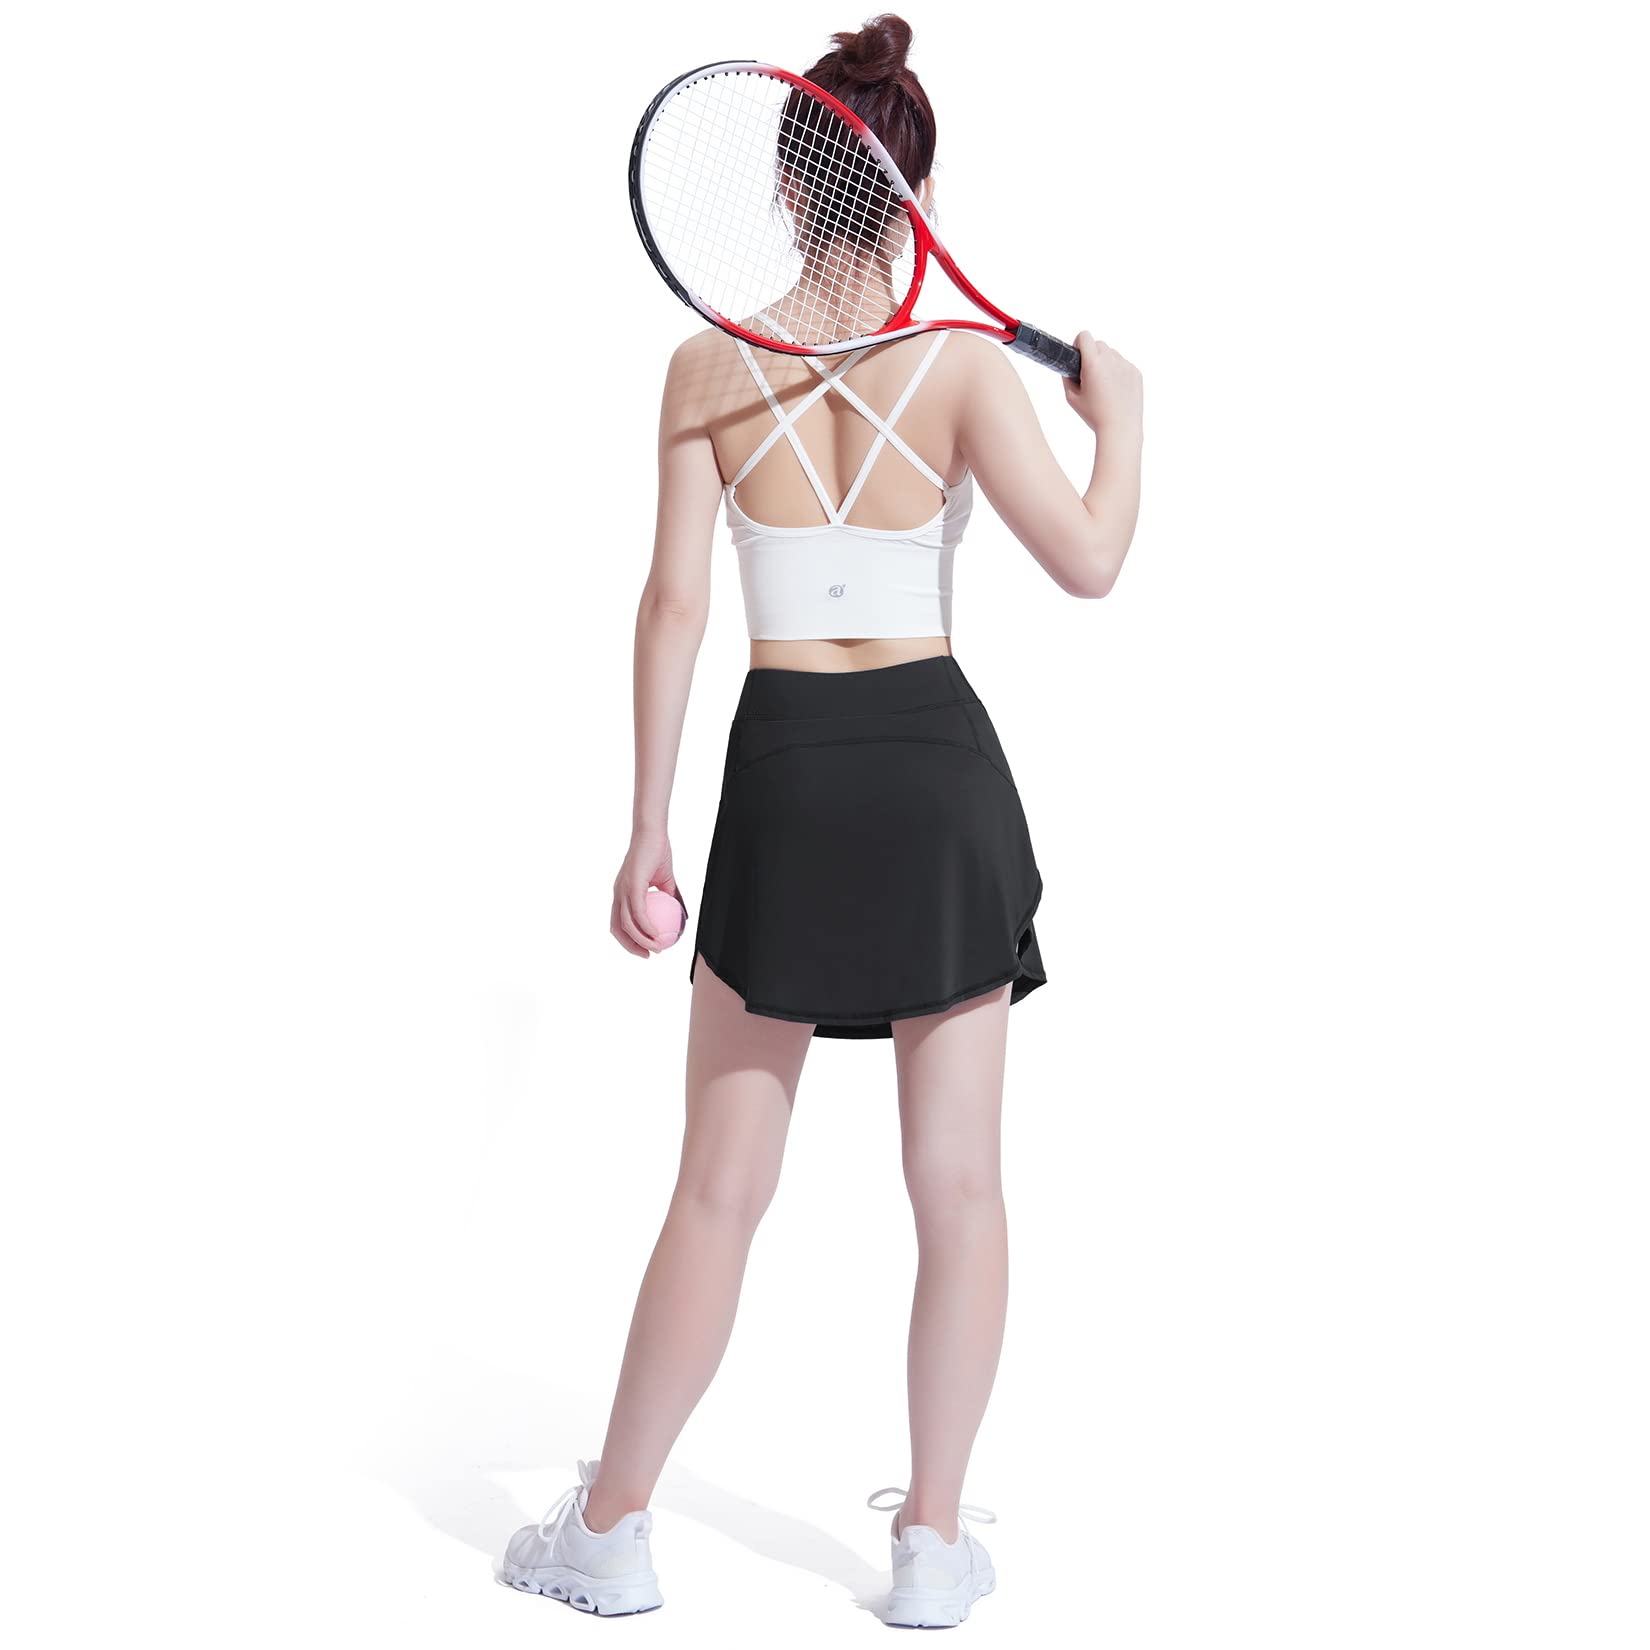 CAMEL CROWN Women's Pleated Tennis Skirt Active Athletic Golf Skort High Waisted Built-in Shorts for Running Workout Sports